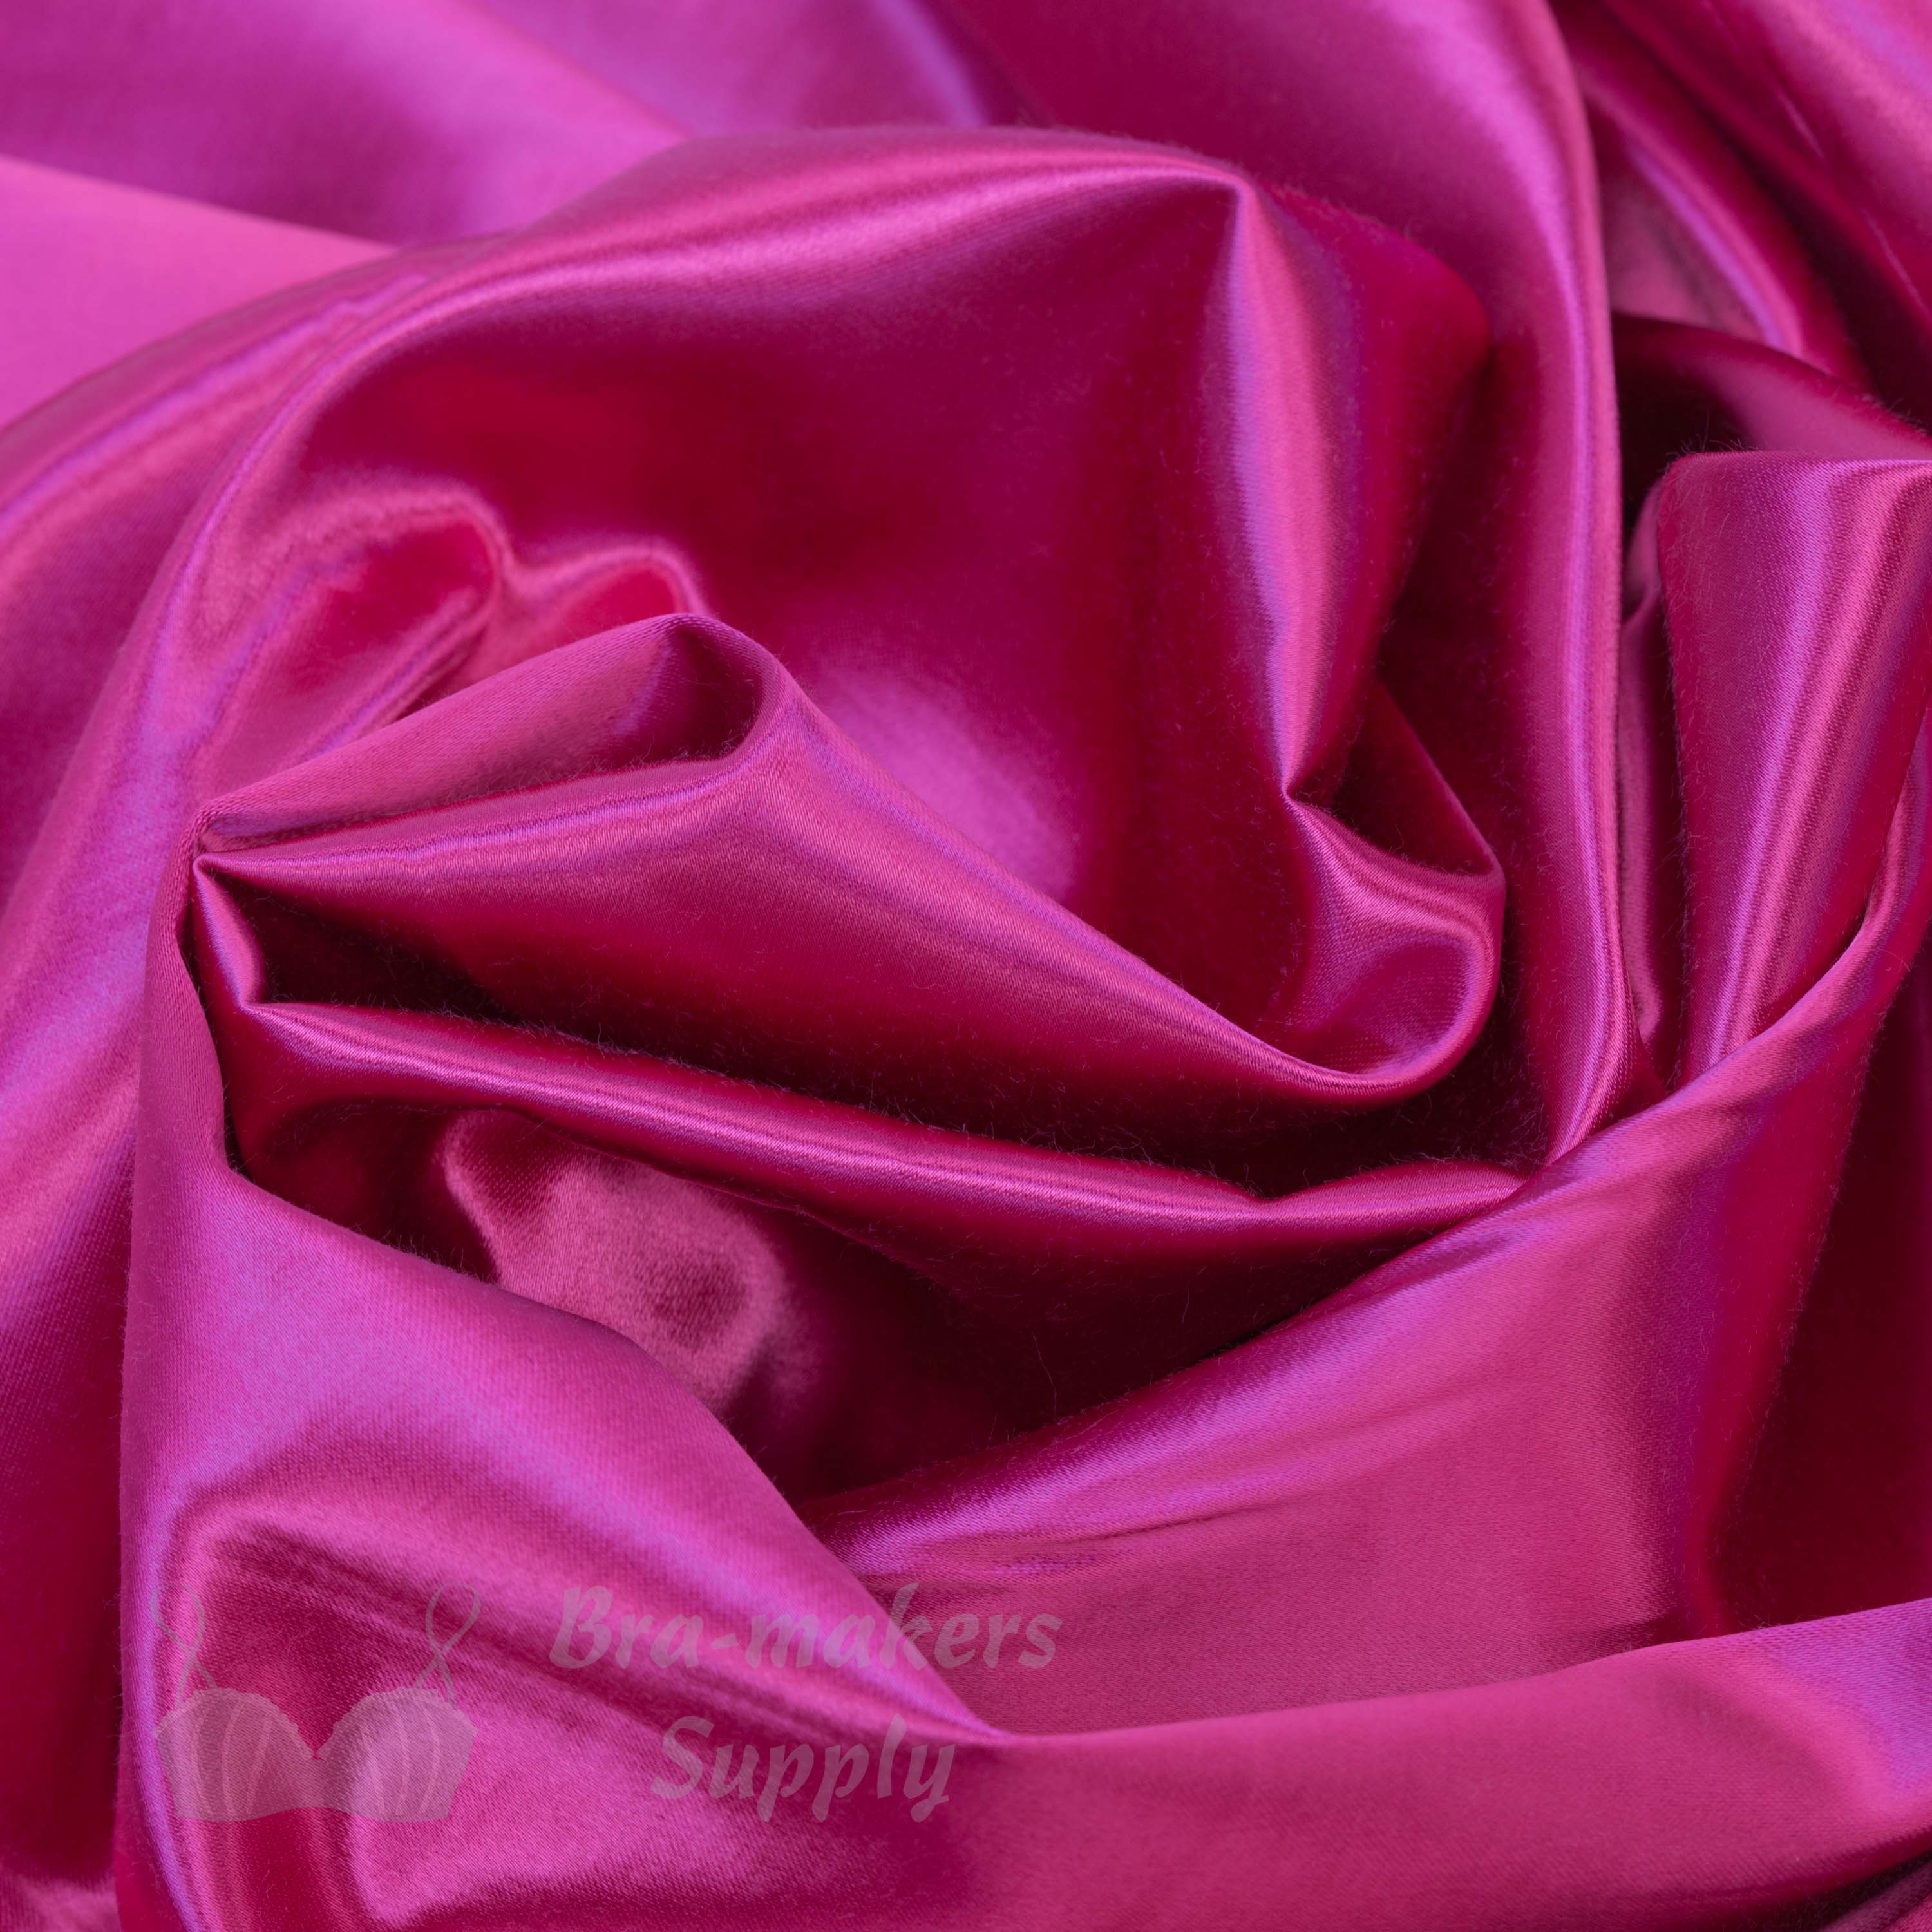 cotton backed satin fuchsia from Bra-Makers Supply twirl shown